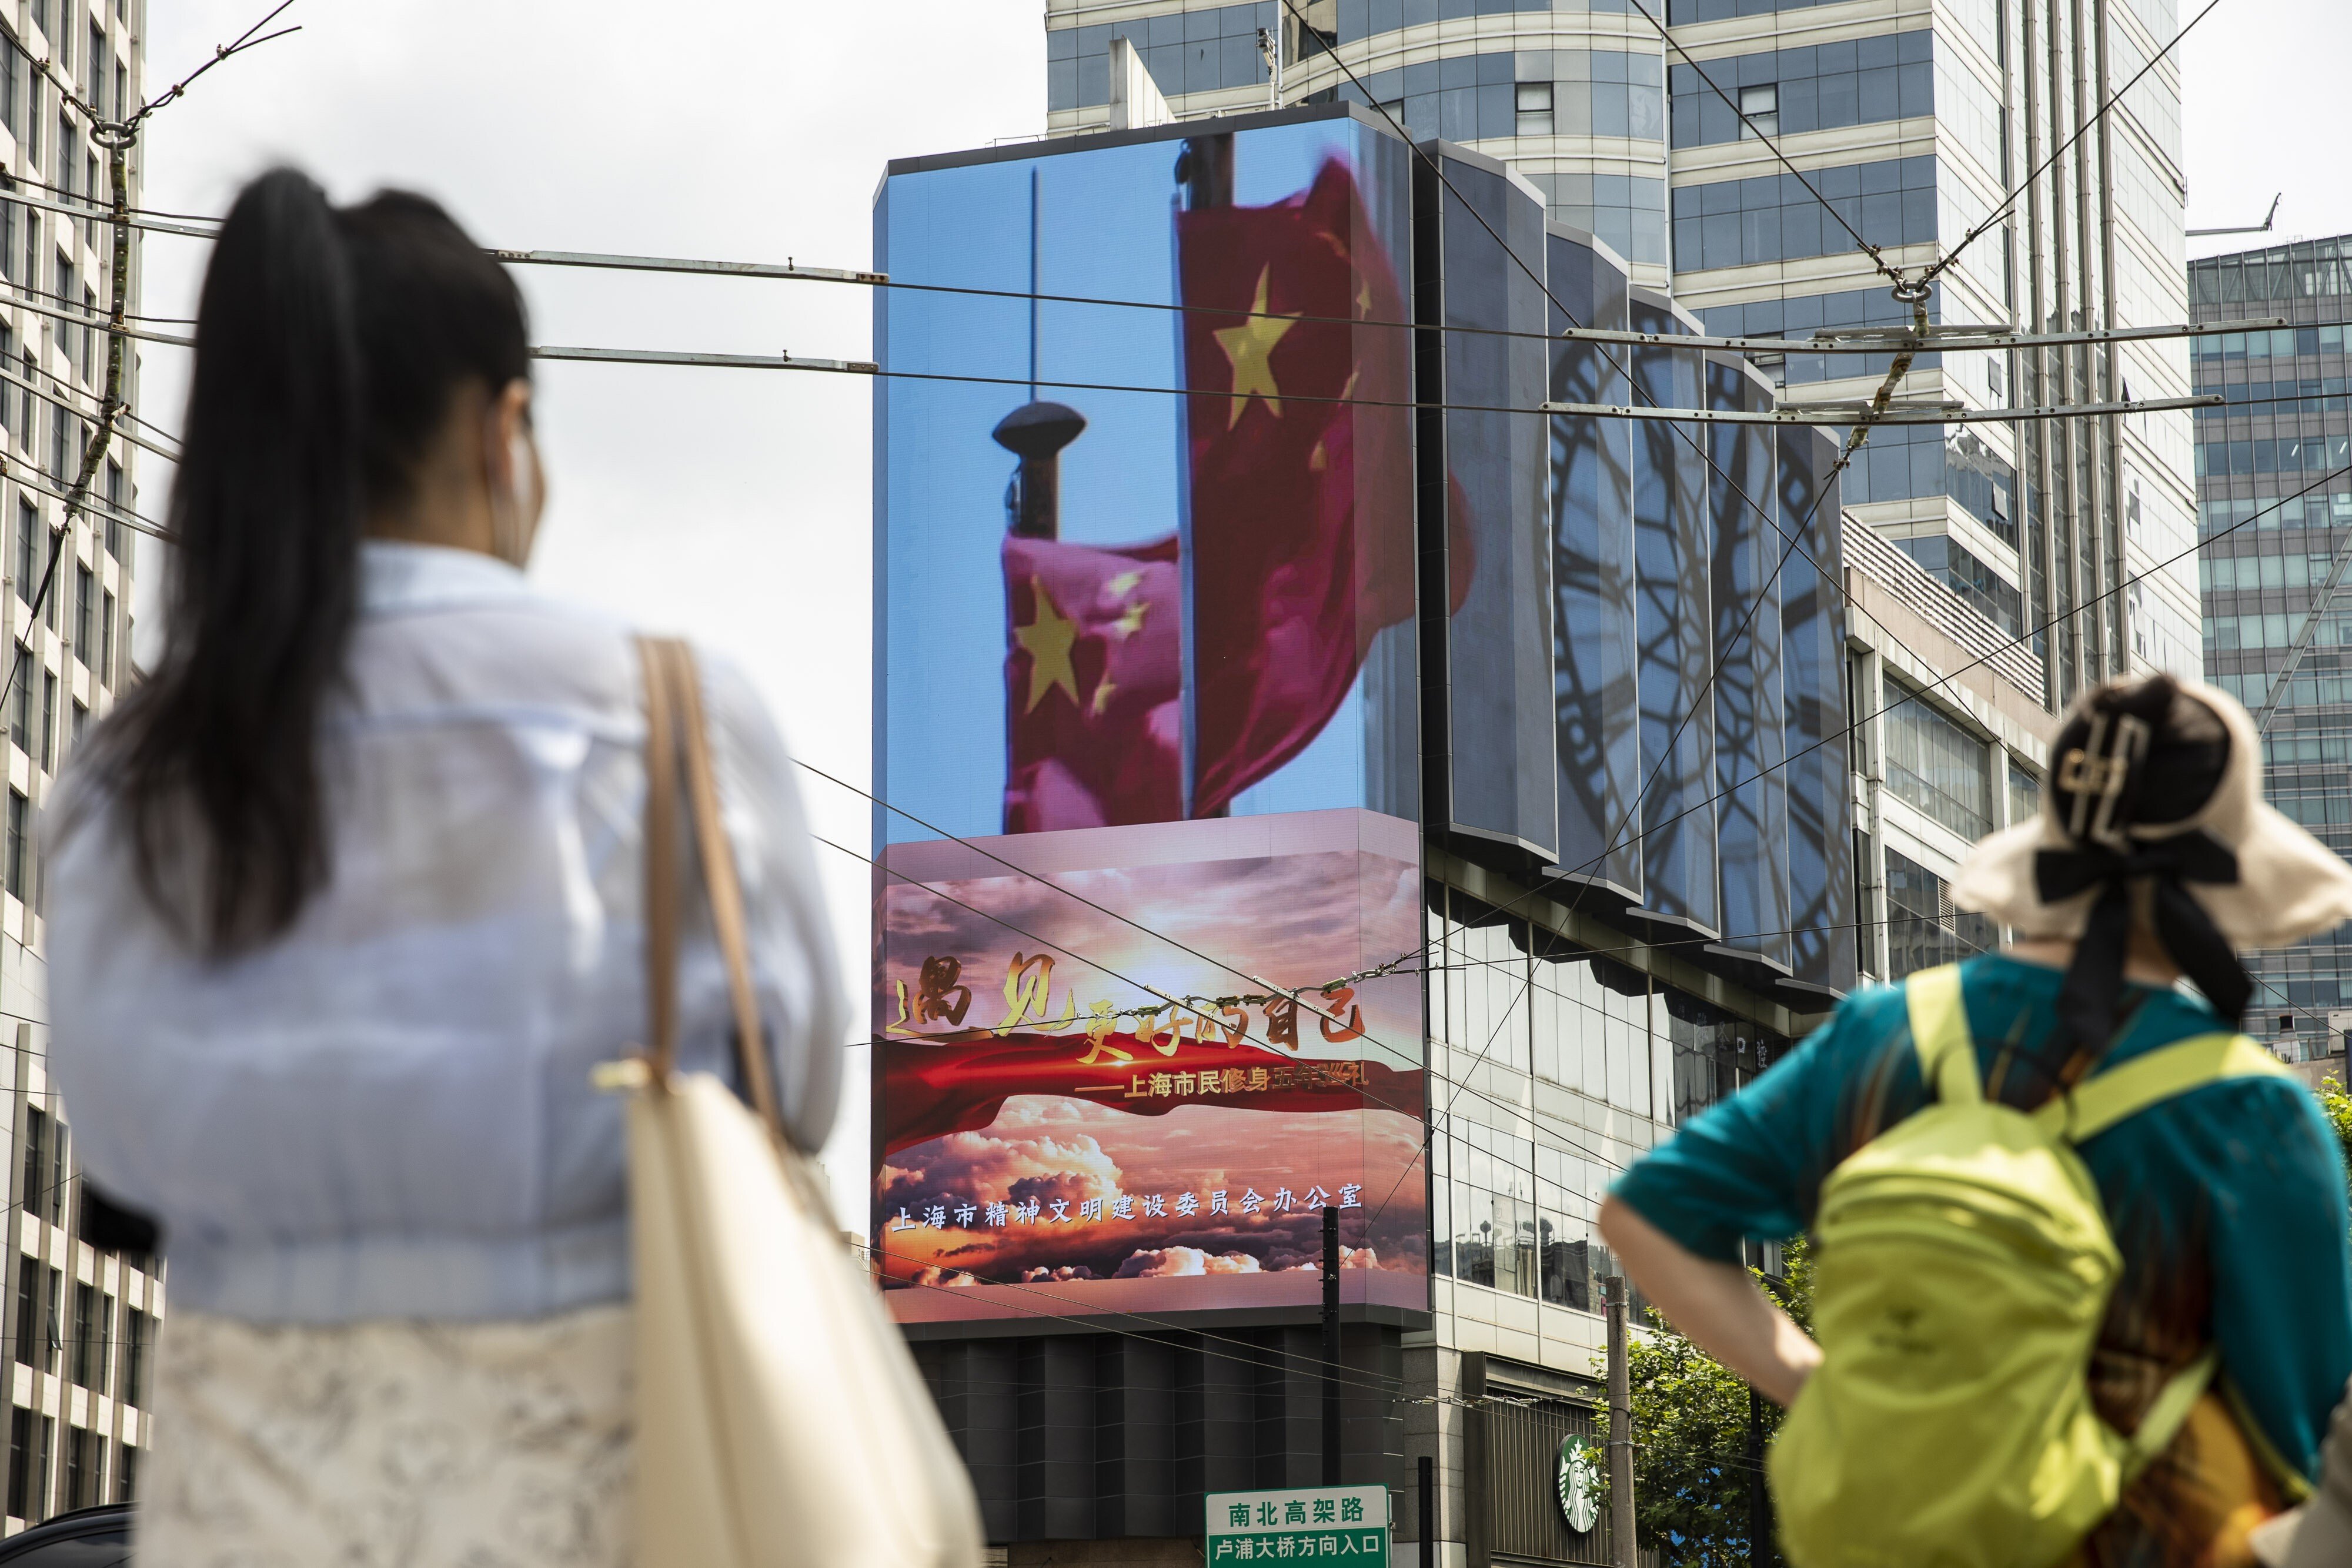 The key to navigating and profiting from the volatility in China is to look at its shifting priorities, says Vontobel analyst. Photo: Bloomberg